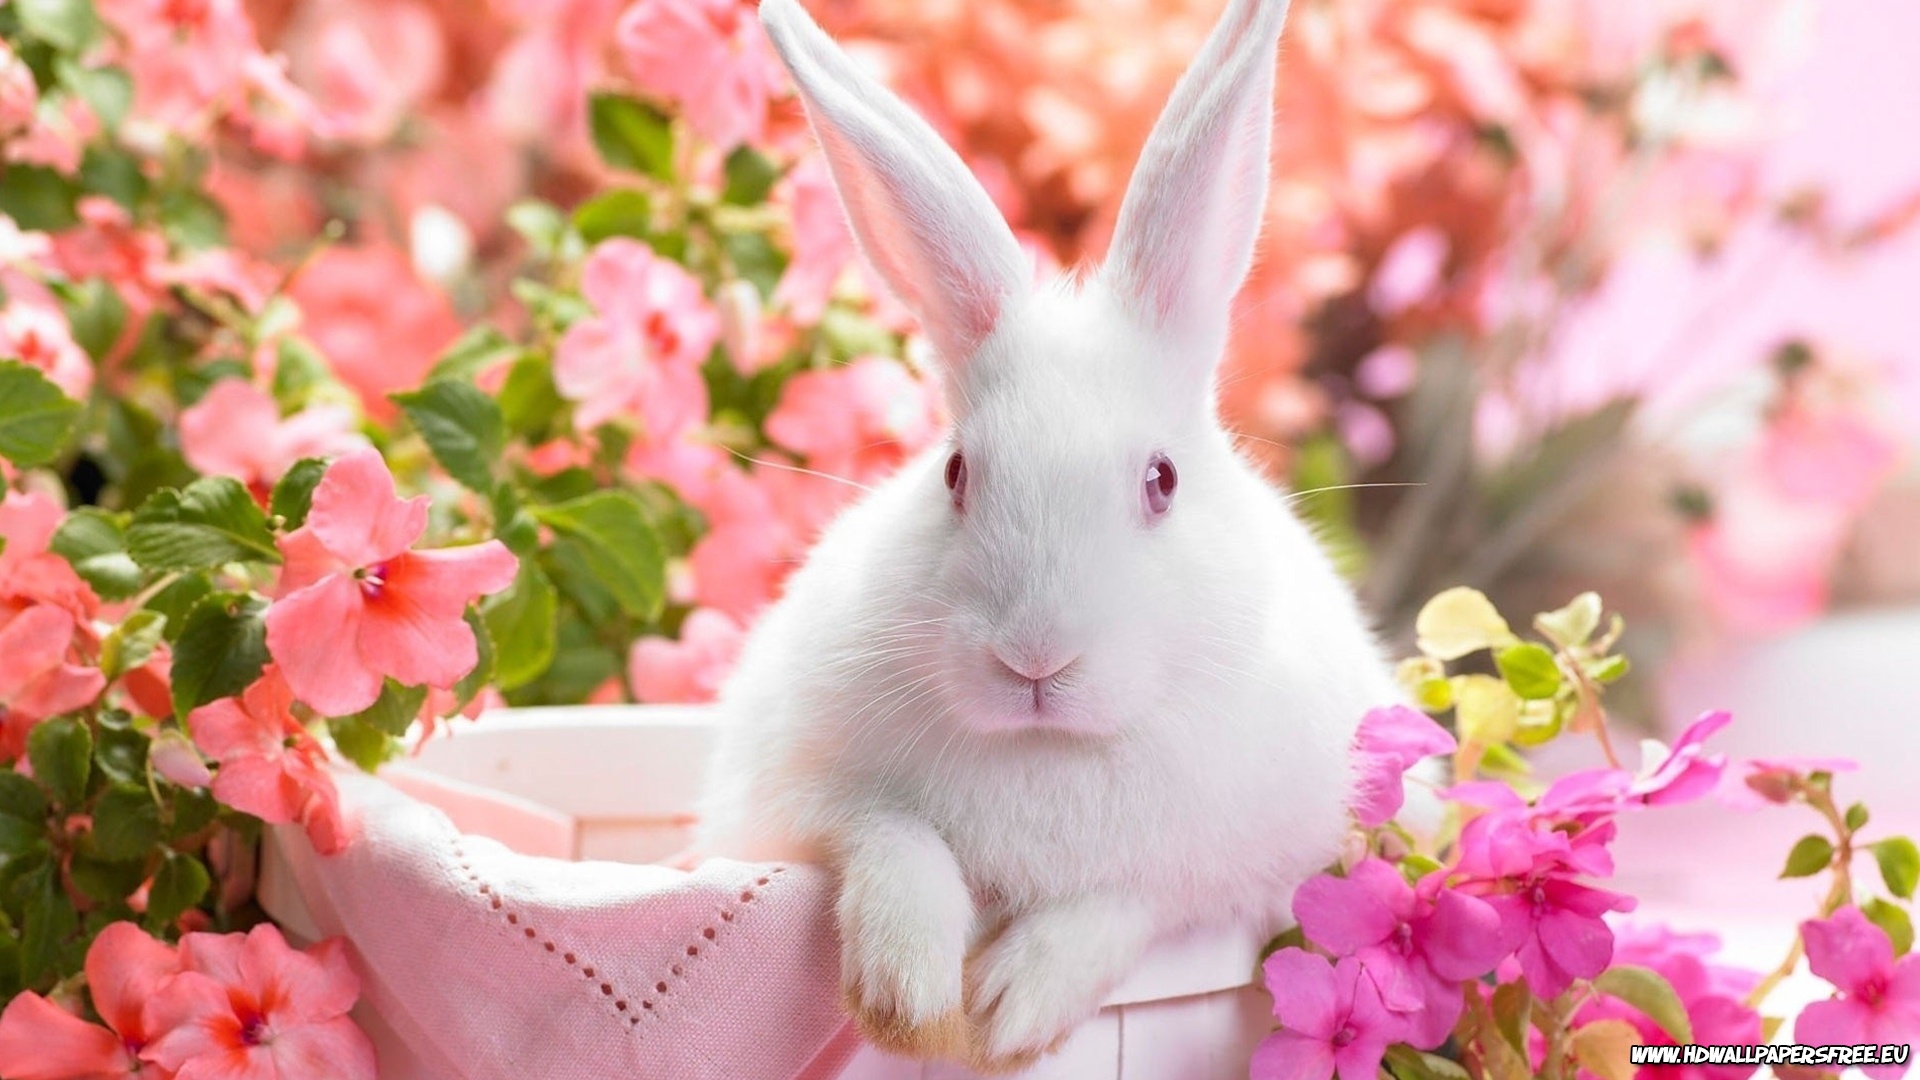 cute easter wallpaper,rabbit,rabbits and hares,domestic rabbit,pink,easter bunny